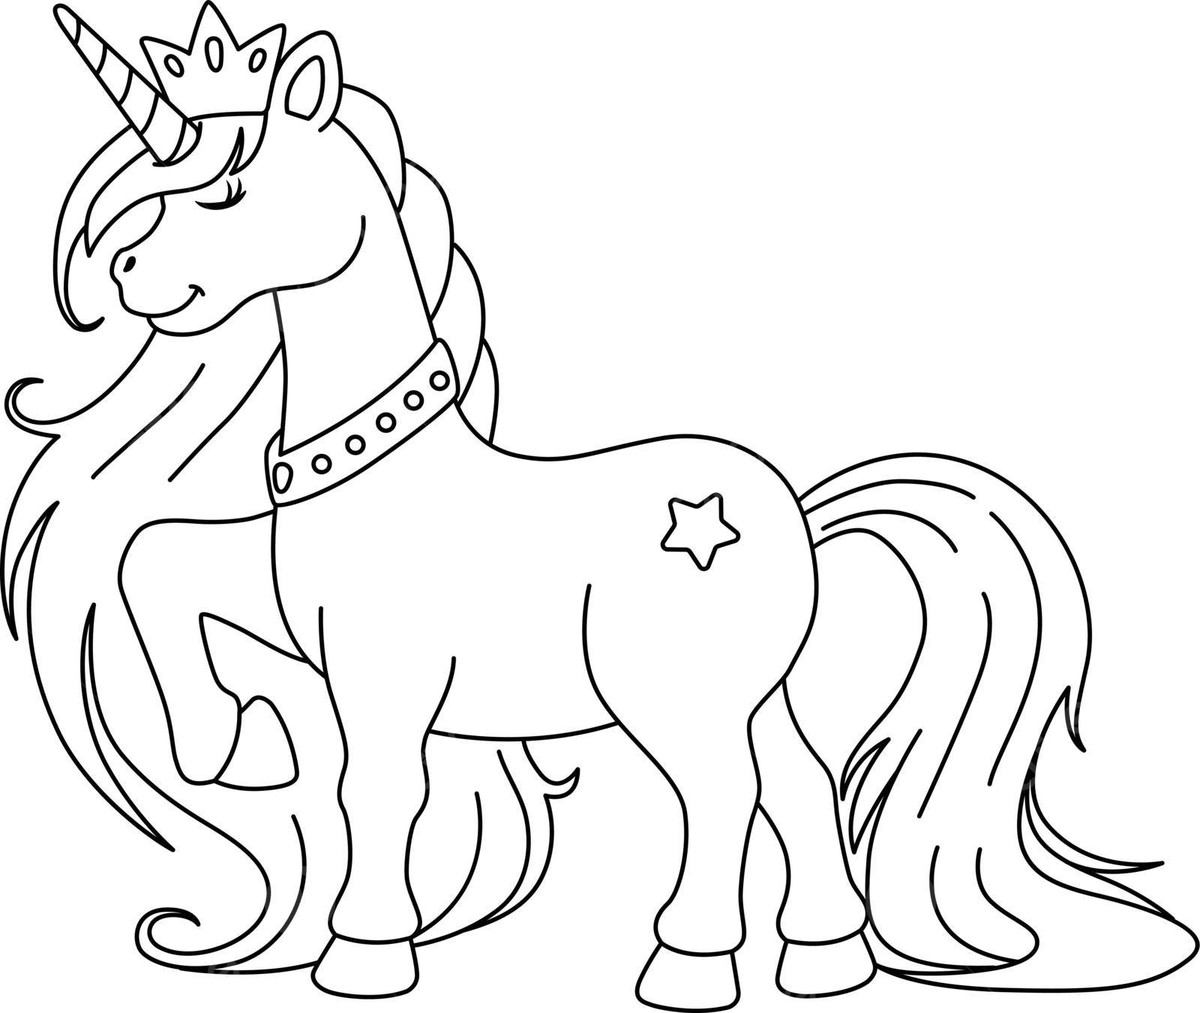 Unicorn princess coloring page isolated for kids icon line unicorn vector icon line unicorn png and vector with transparent background for free download